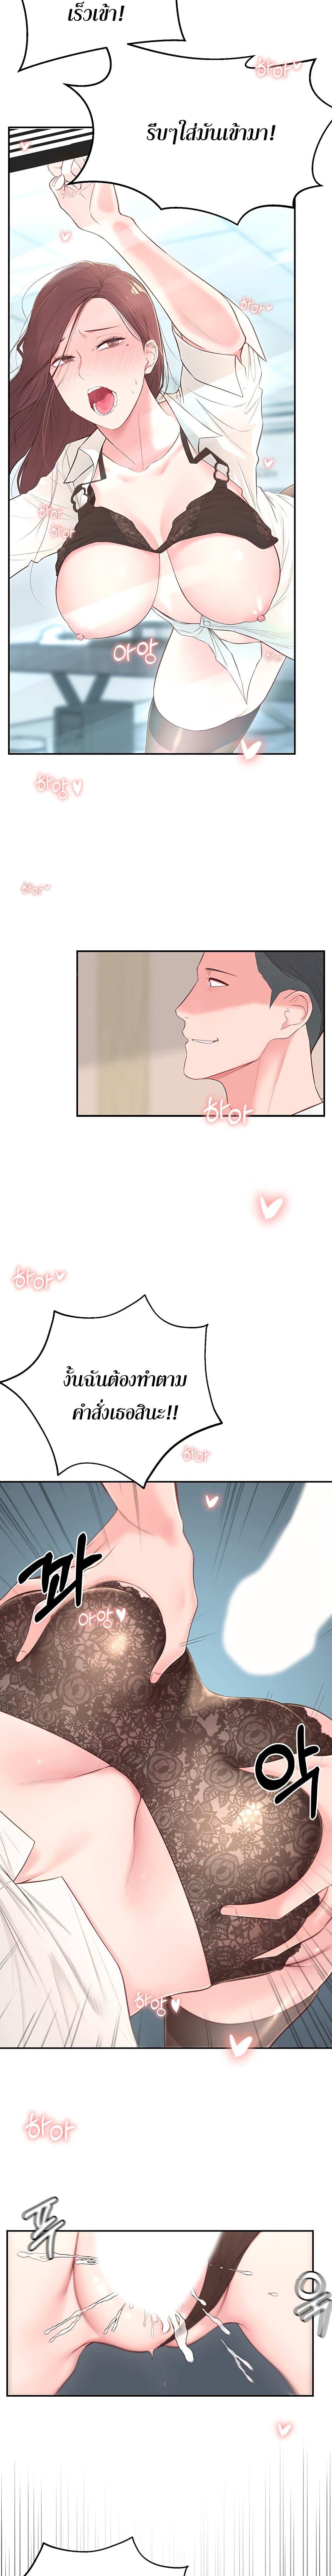 A Knowing Sister 4 ภาพ 13